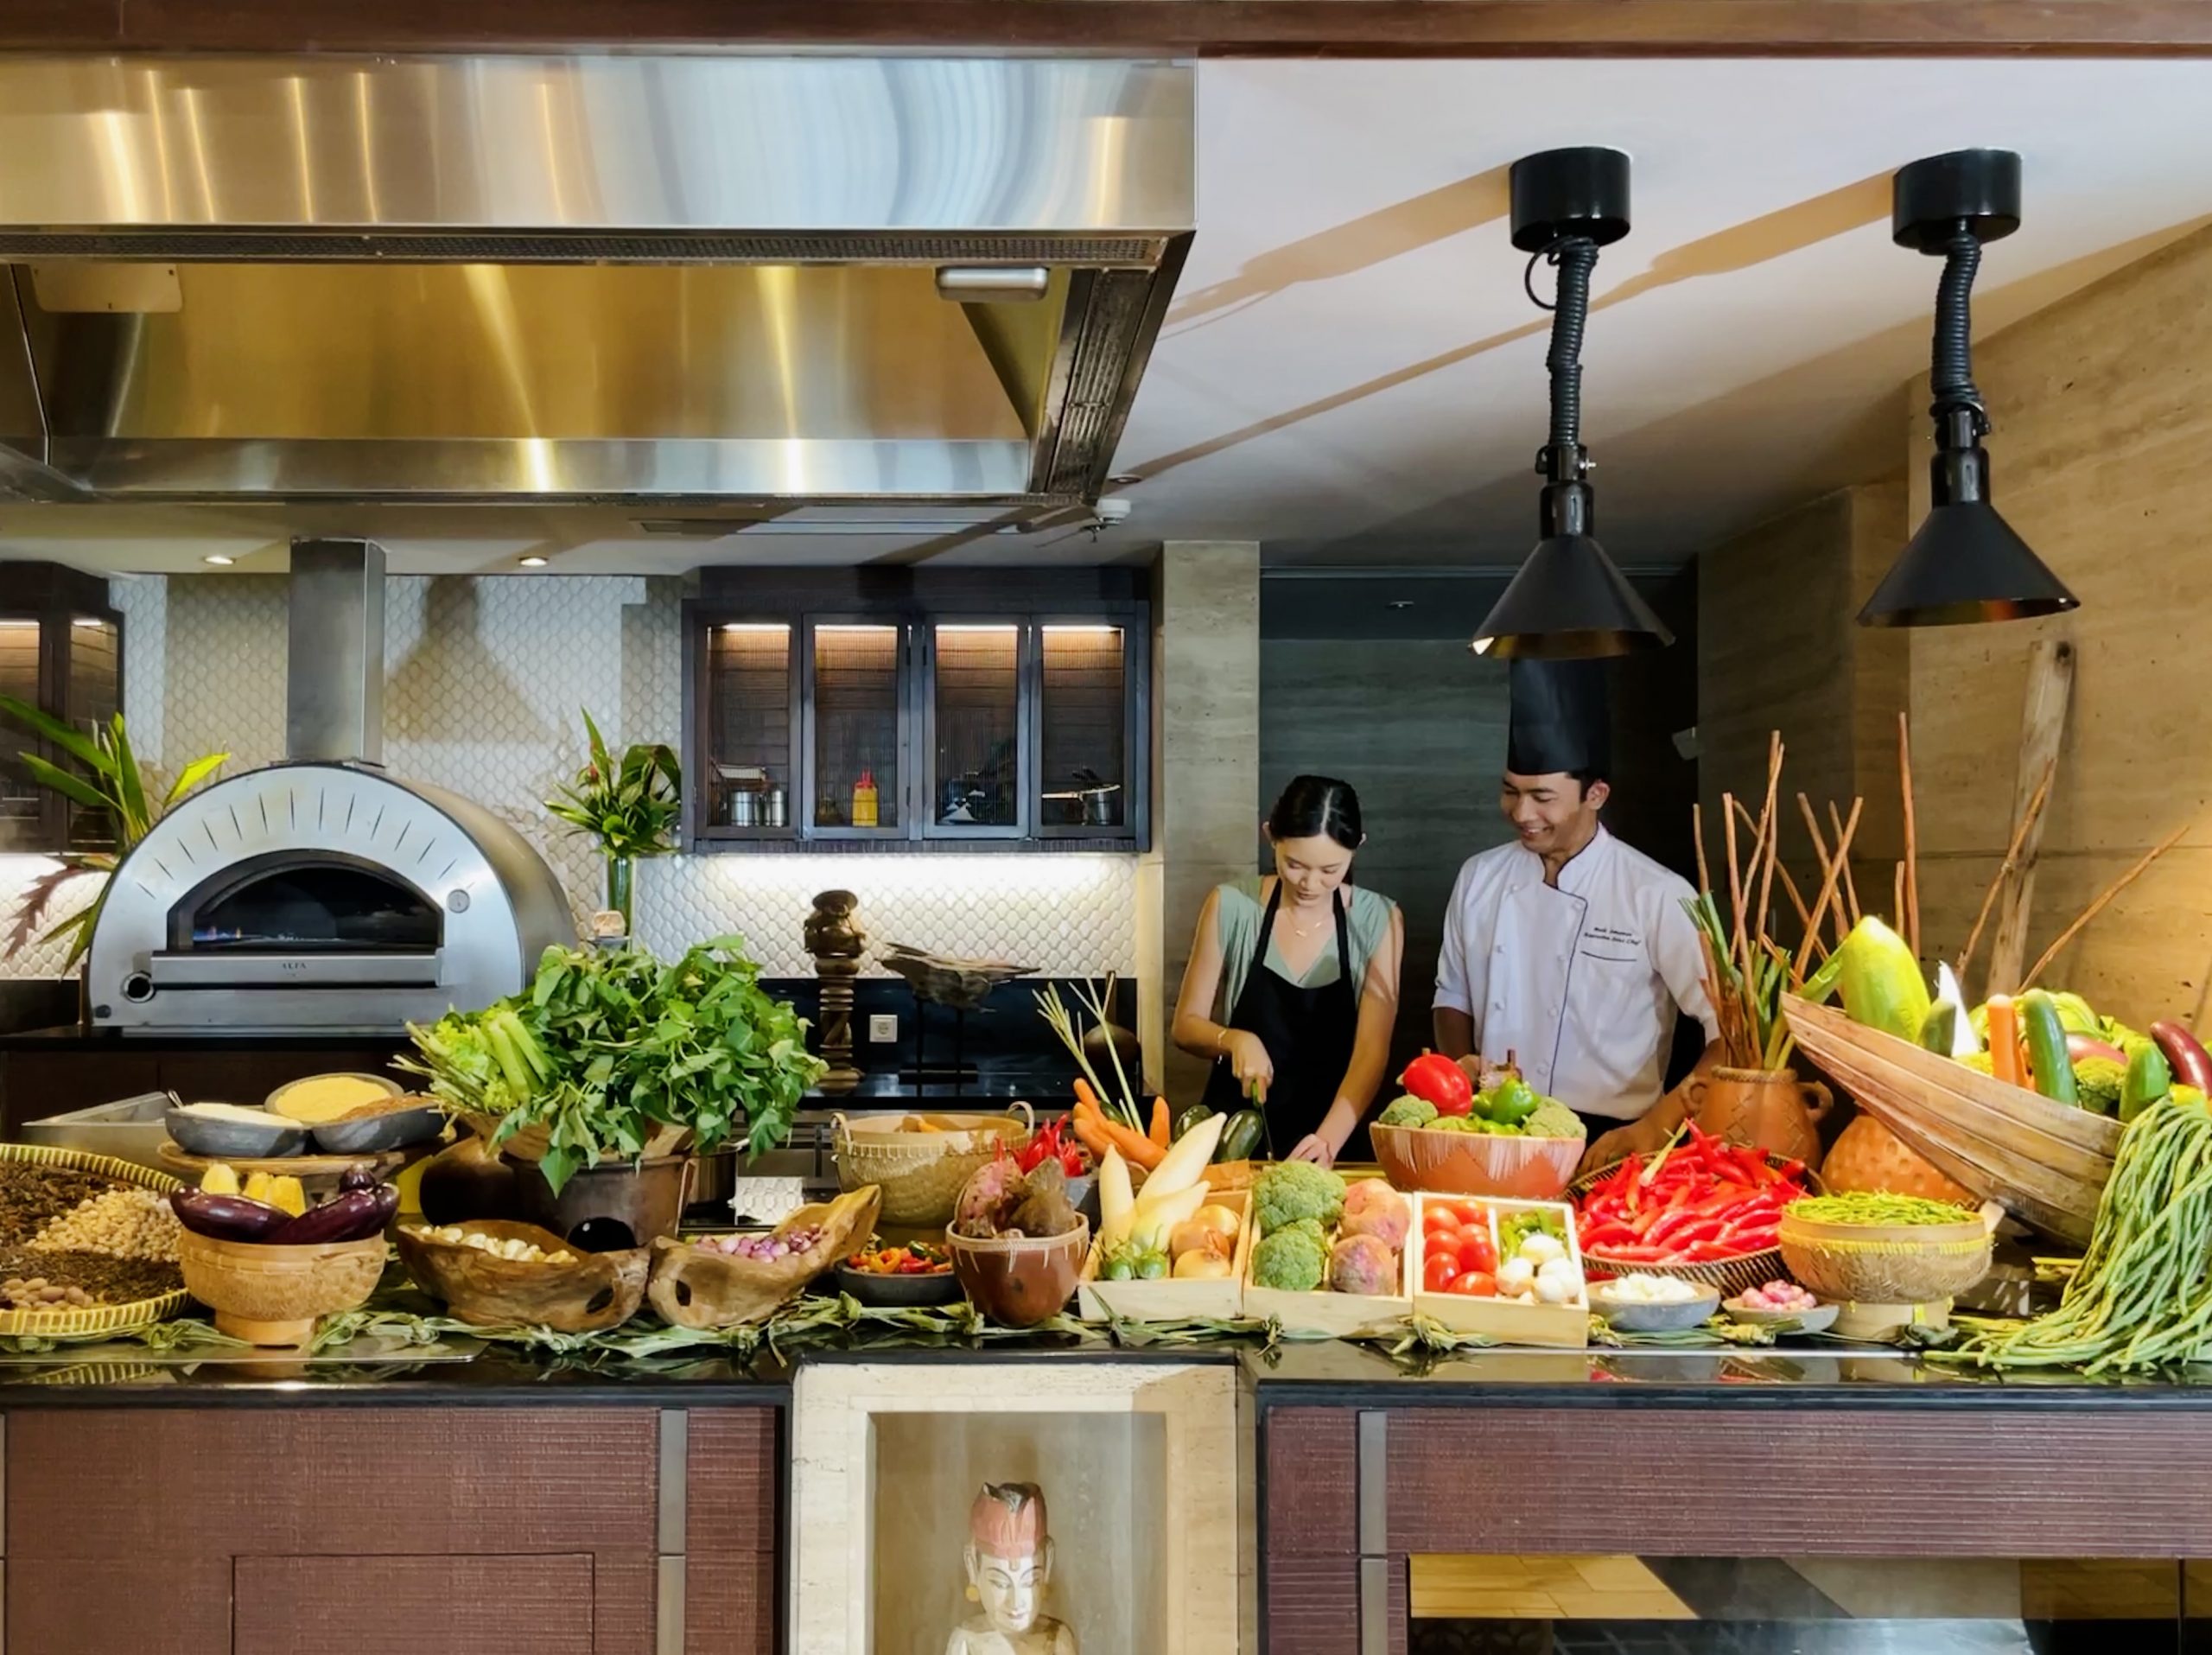 Conrad Bali Appoints New Executive Chef and Launches Scenographic Cooking Classes